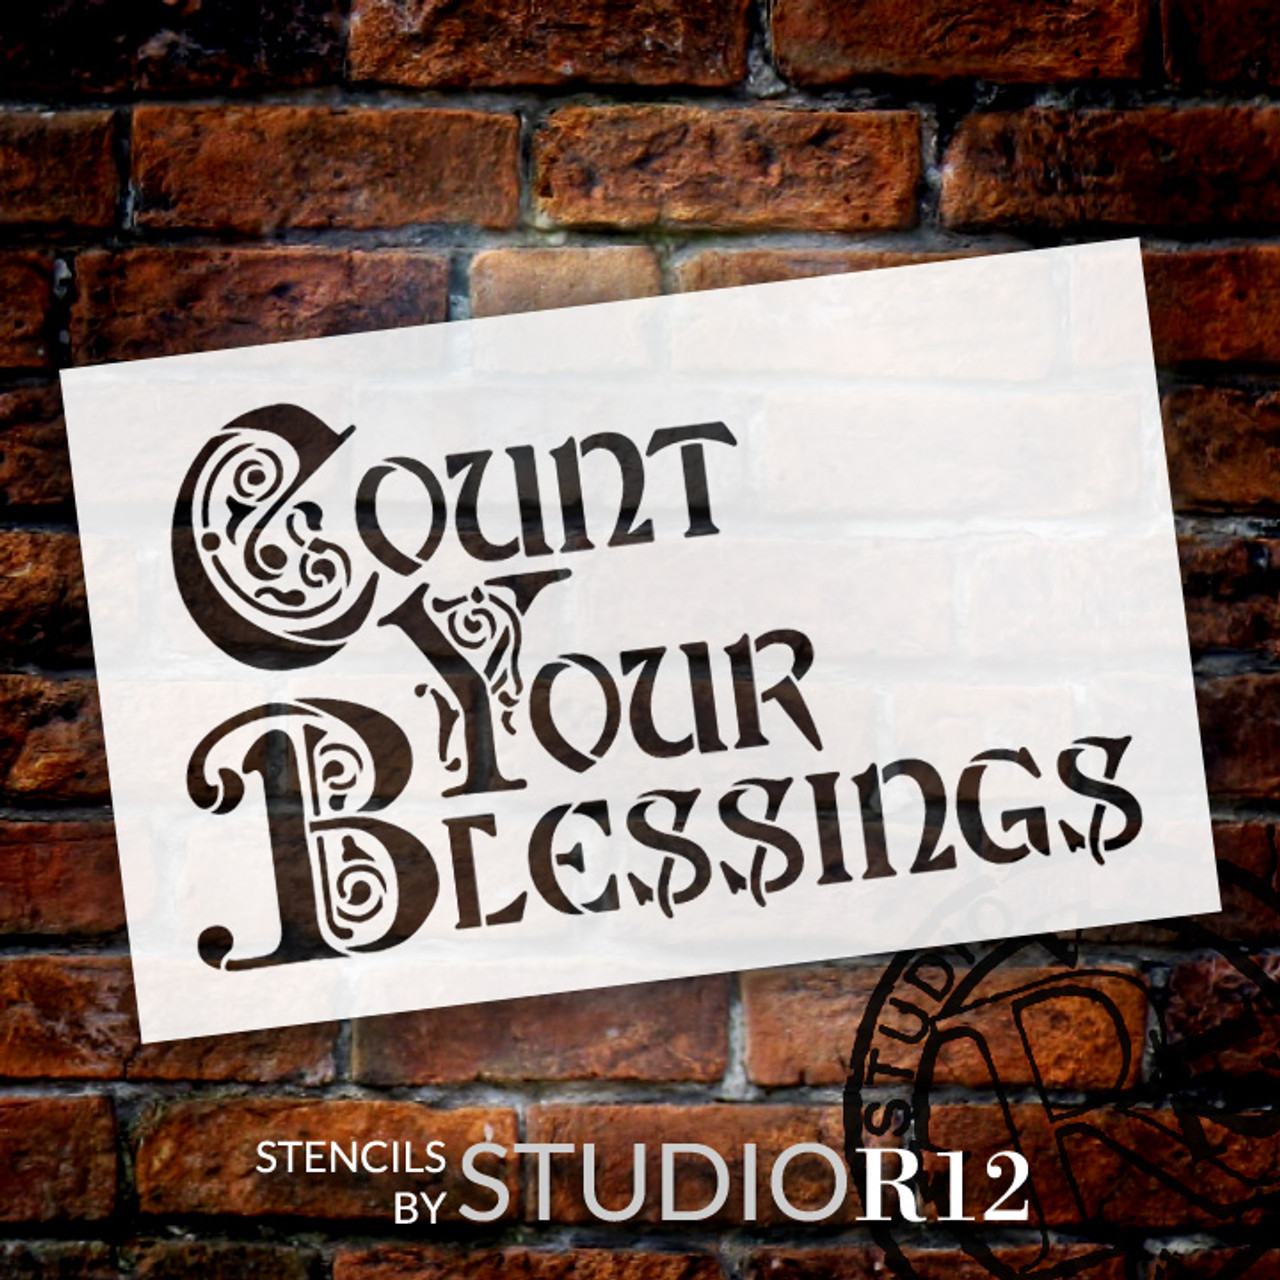 Count Your Blessings - Illuminated - Word Art Stencil - 18" x 10" - STCL1352_3 by StudioR12